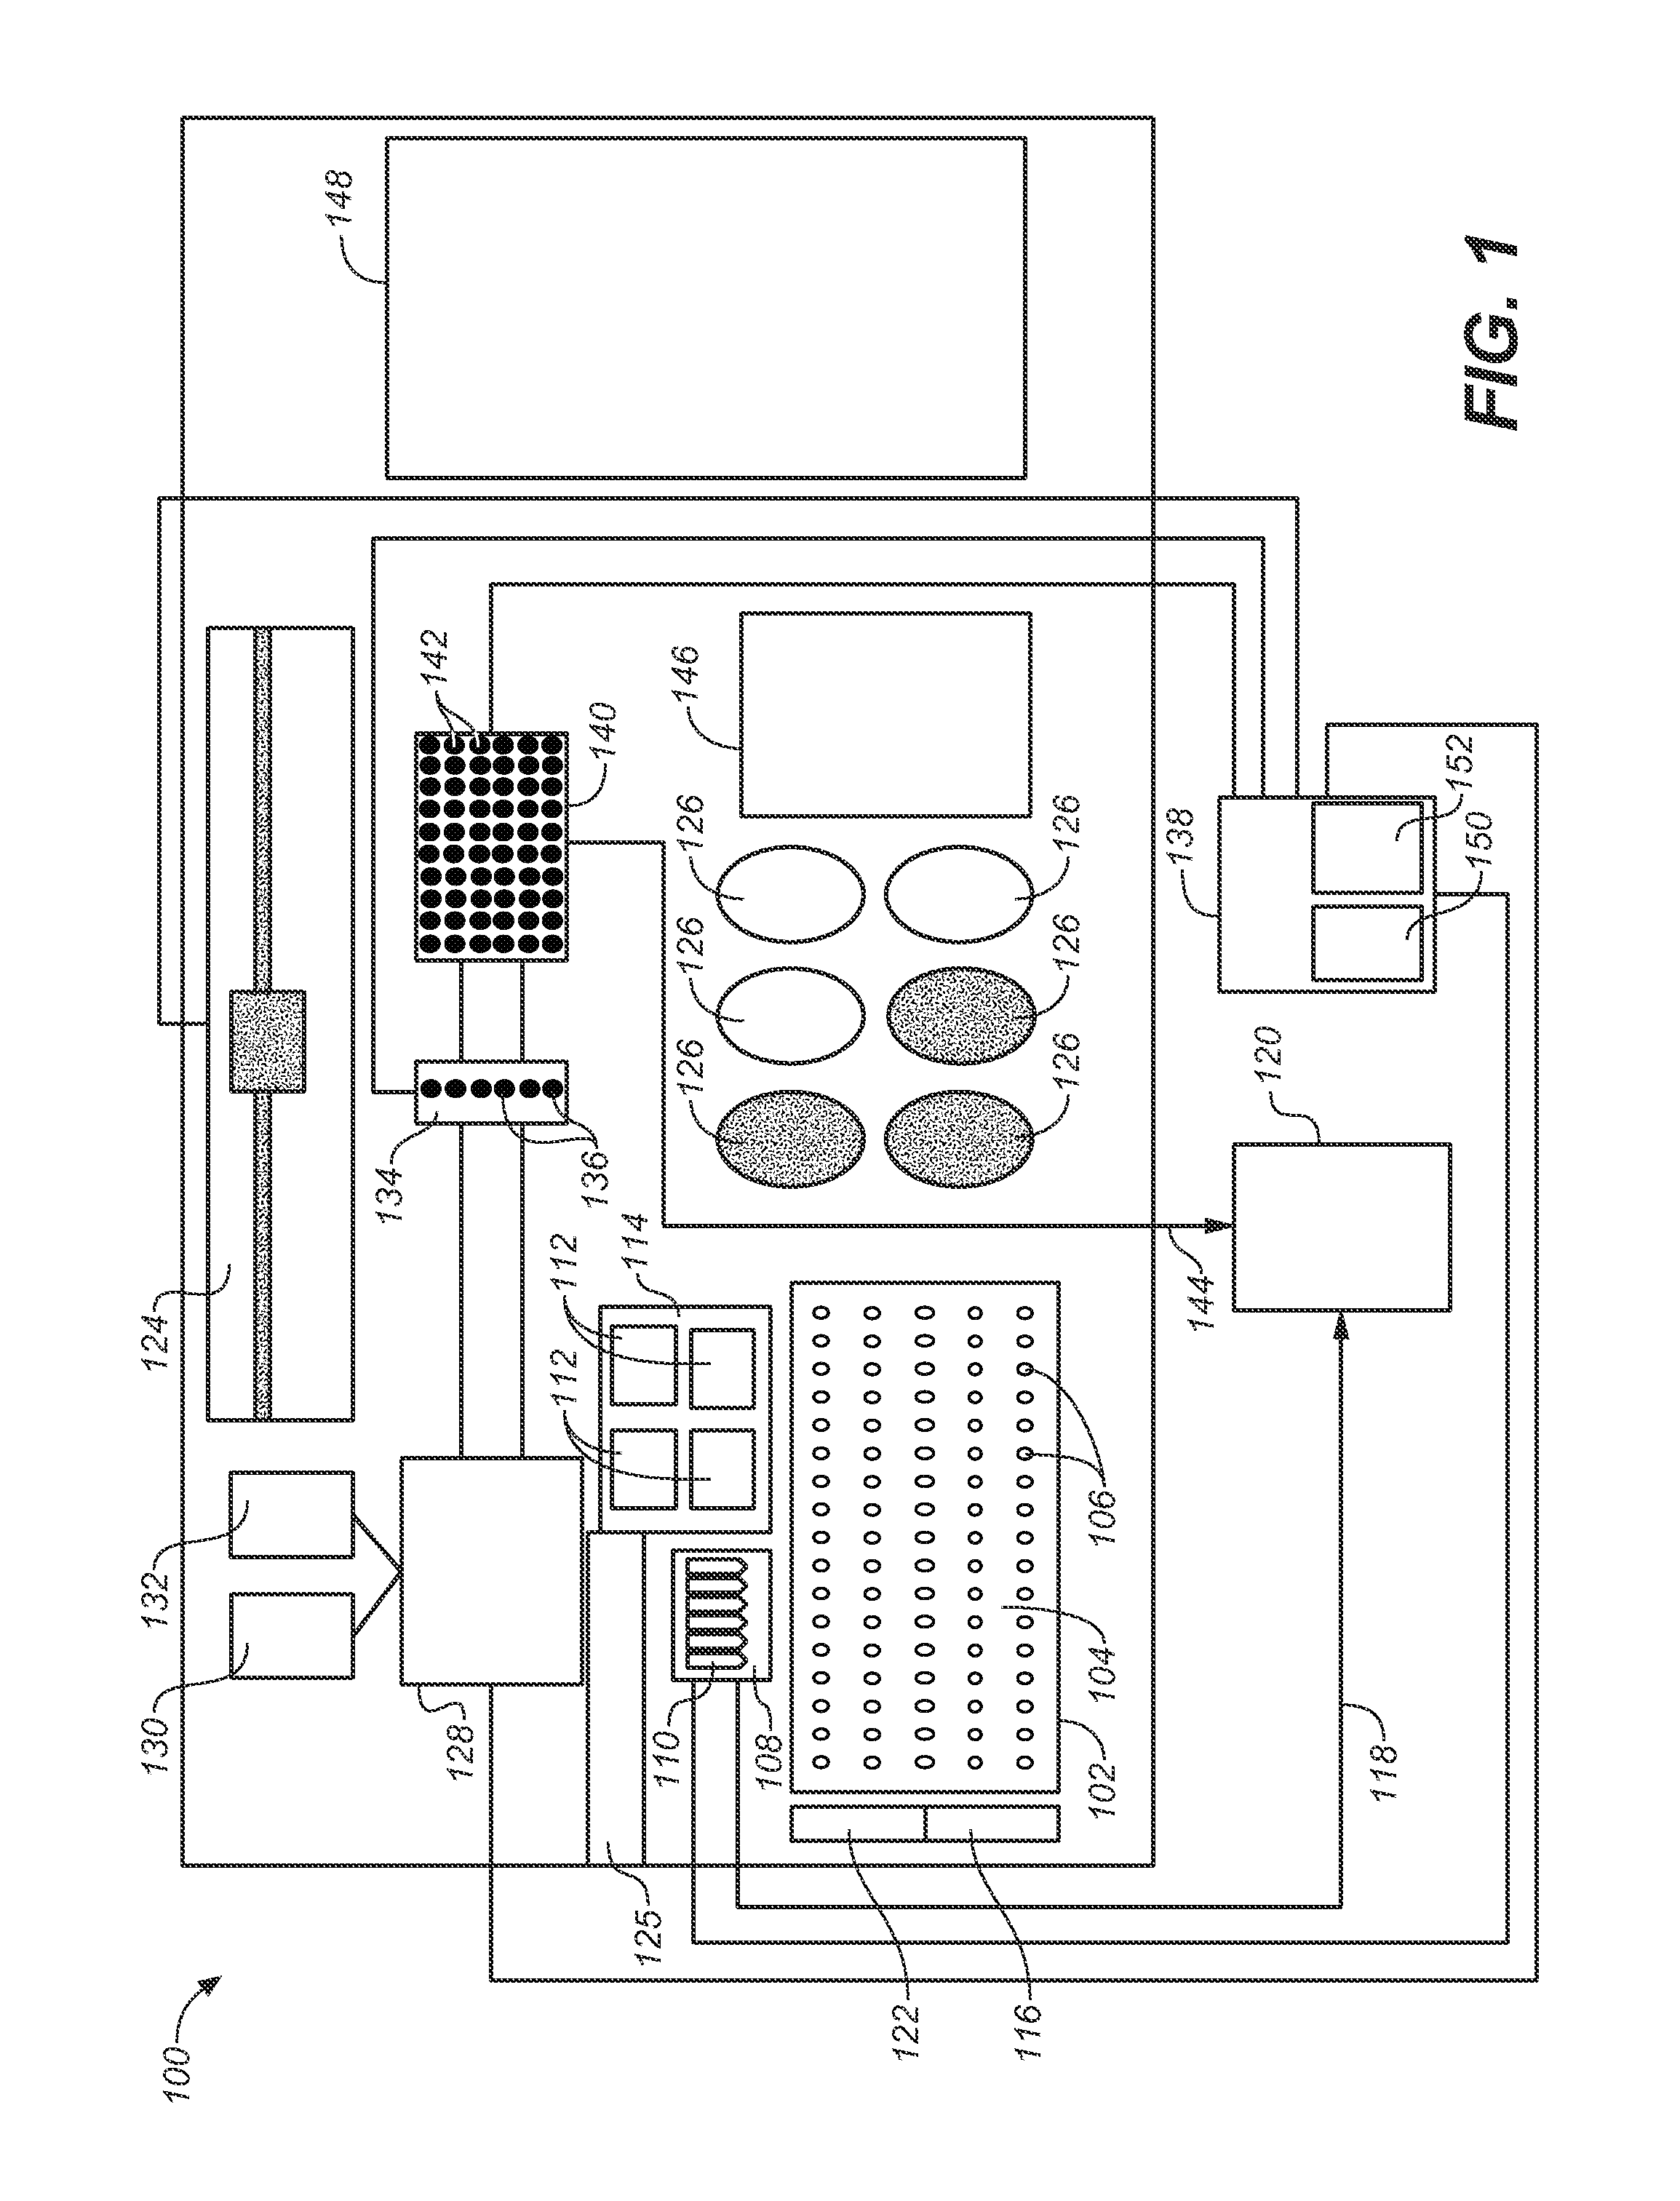 High-throughput sample processing systems and methods of use